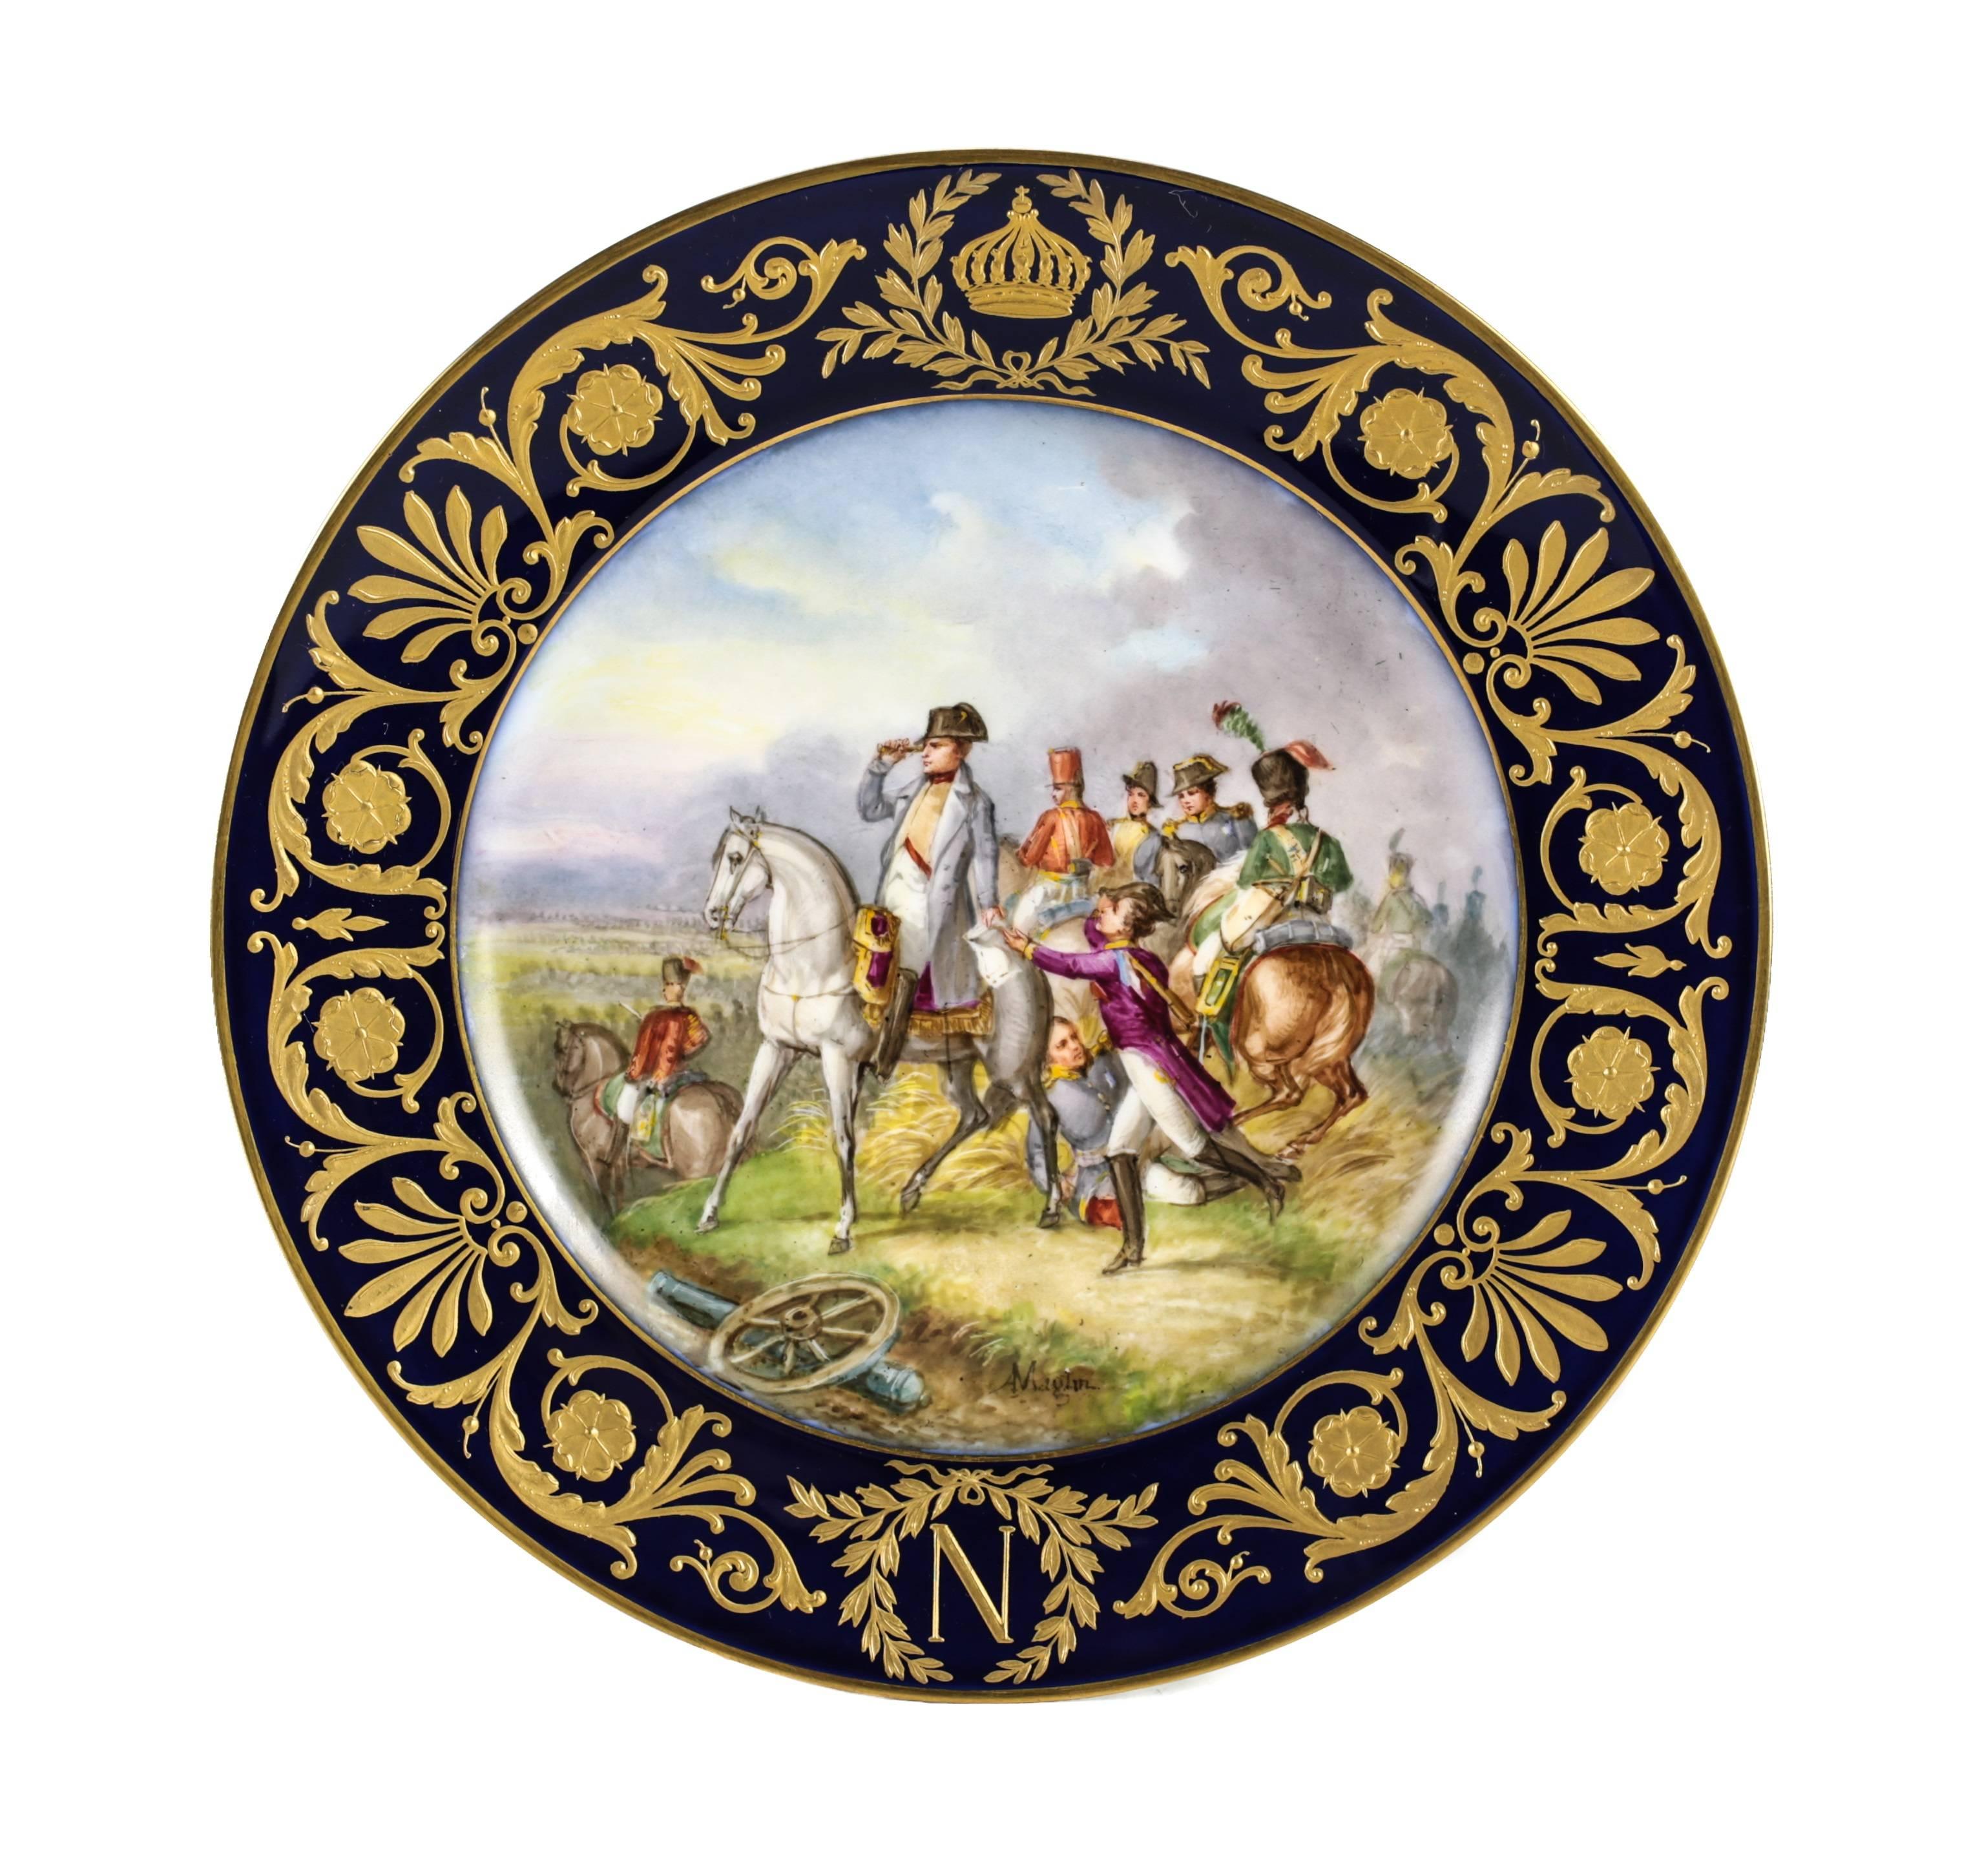 A nice set of eight hand-painted porcelain plates, each prominently depicting Emperor Napoleon I on horseback in various battle scenes. Rich and raised gilt borders, the 12 o'clock position with a crown and the 6 o'clock with the Napoleonic N. All